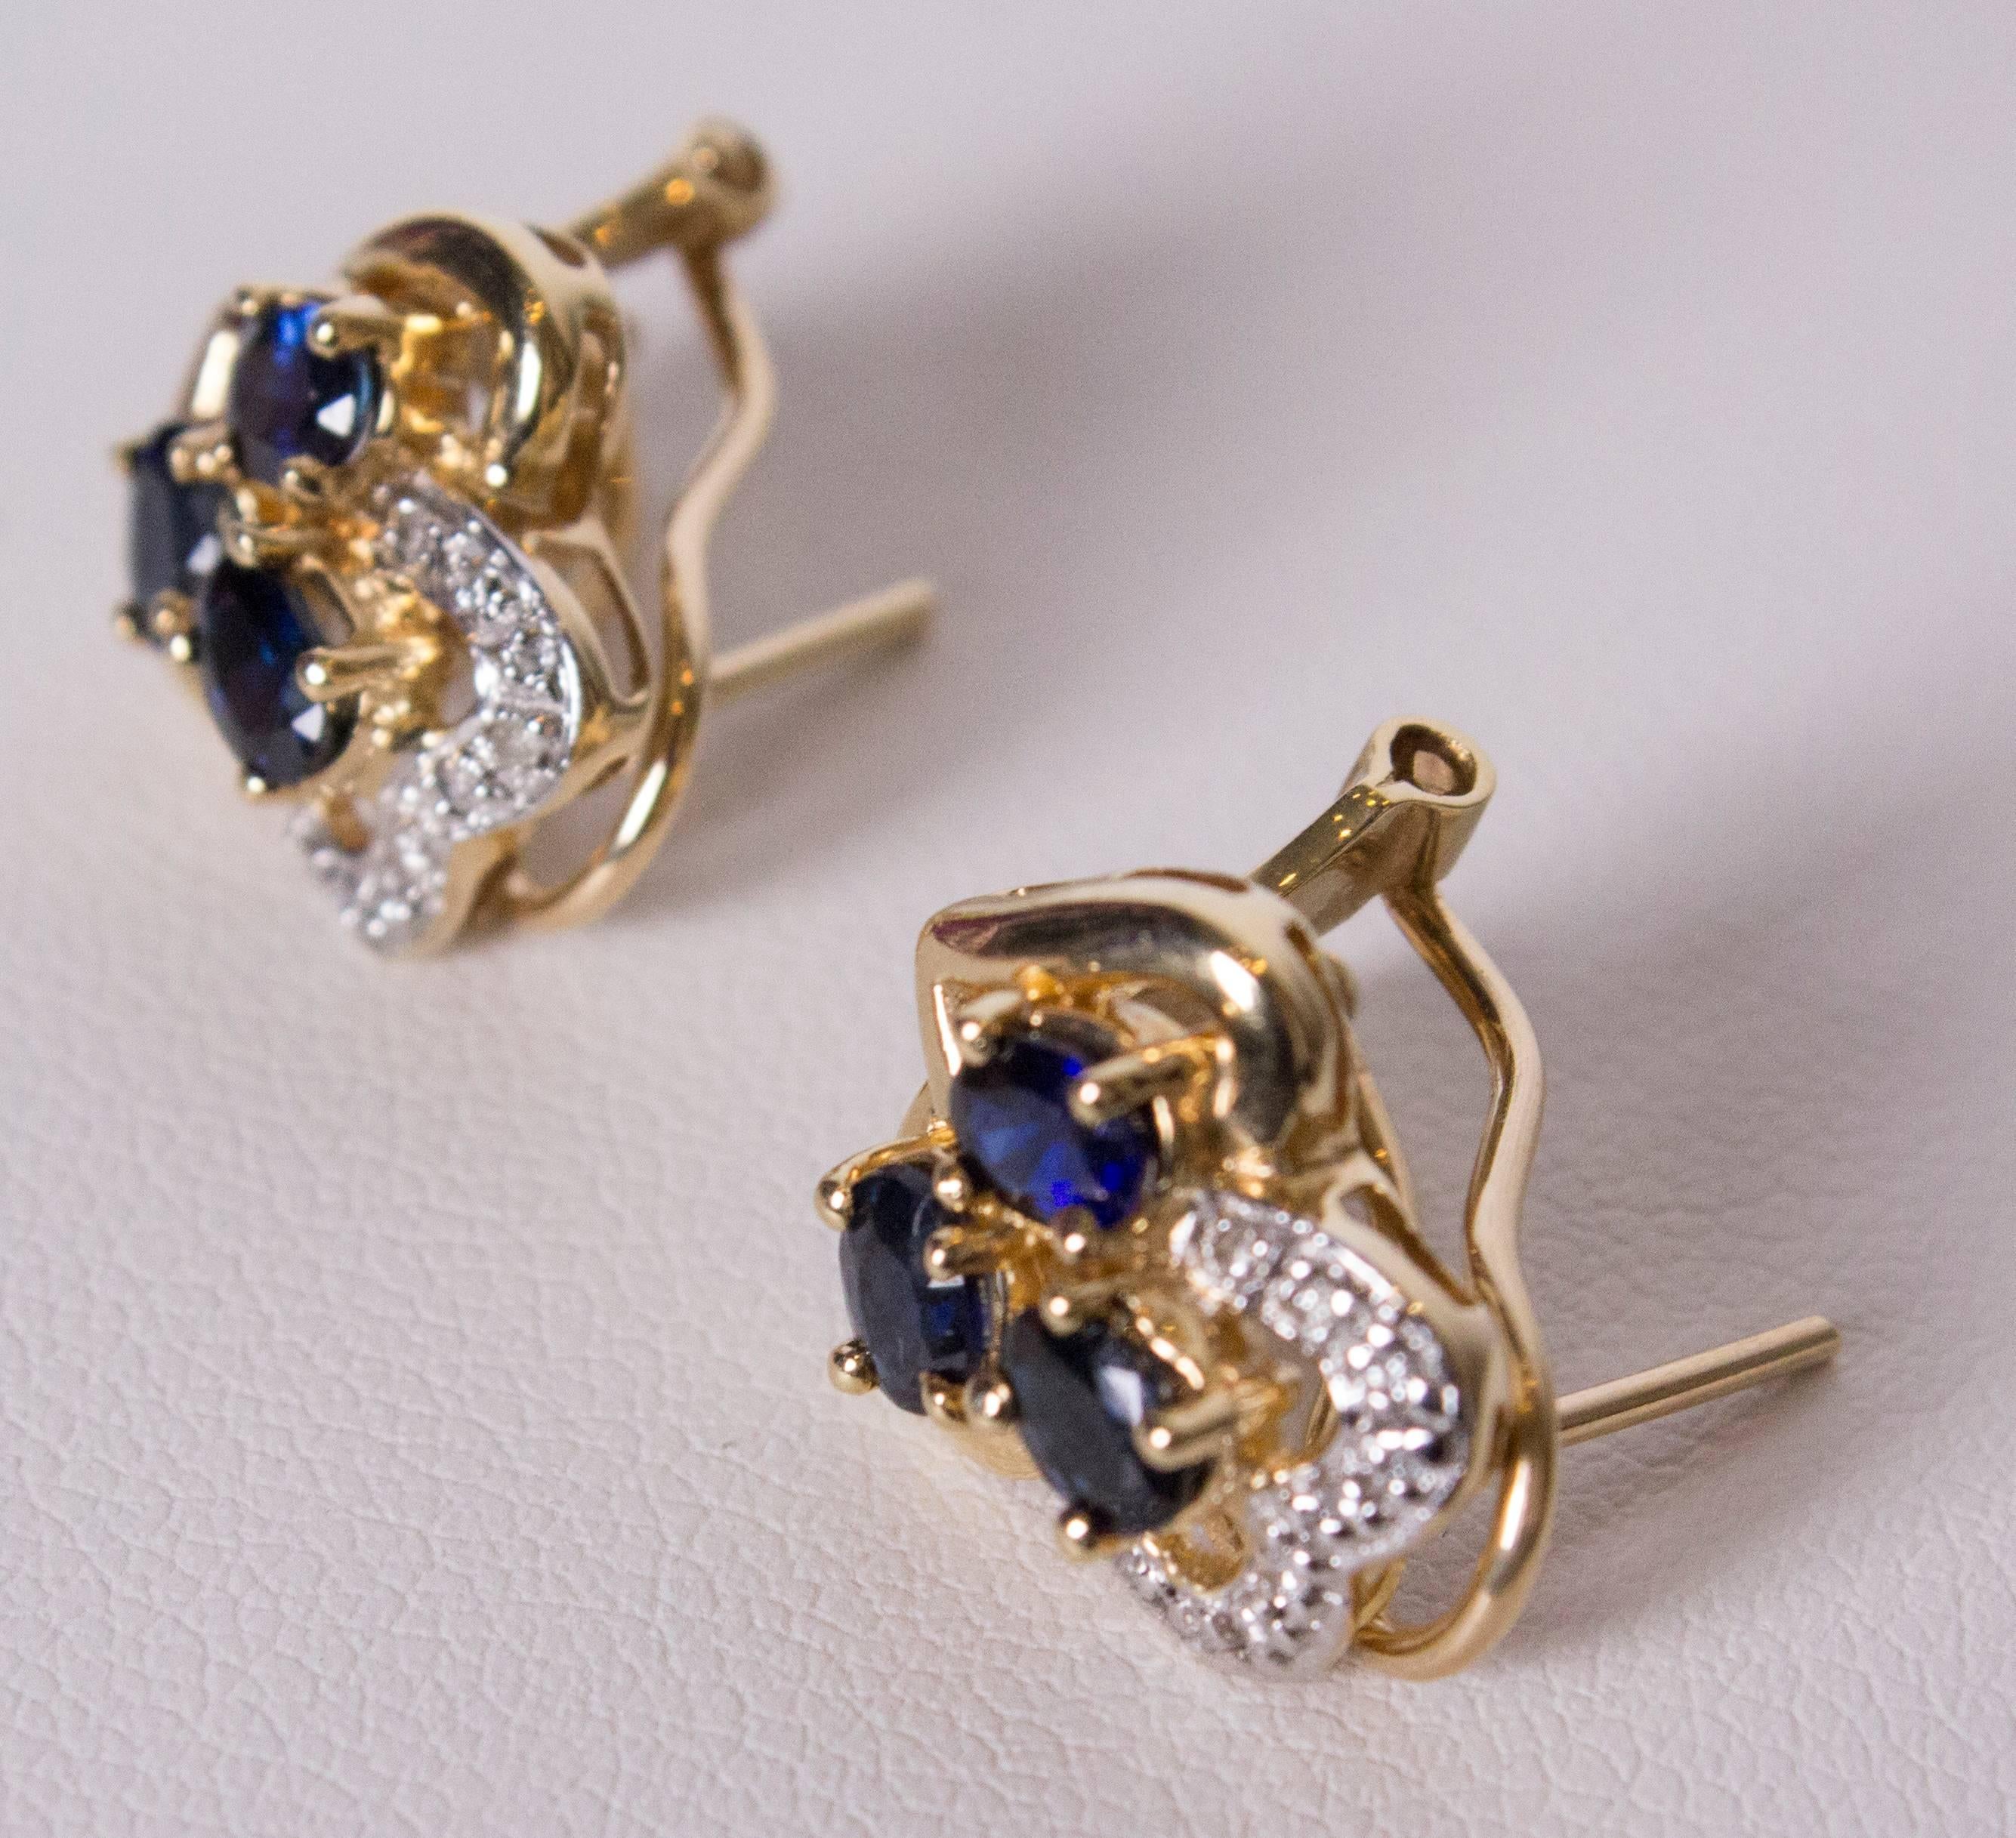 A pretty pair of earrings for Spring. The earrings have three saphires, one surrounded by diamonds, set in gold with a folding clasp at the back. width 1/2'', height 1/2''